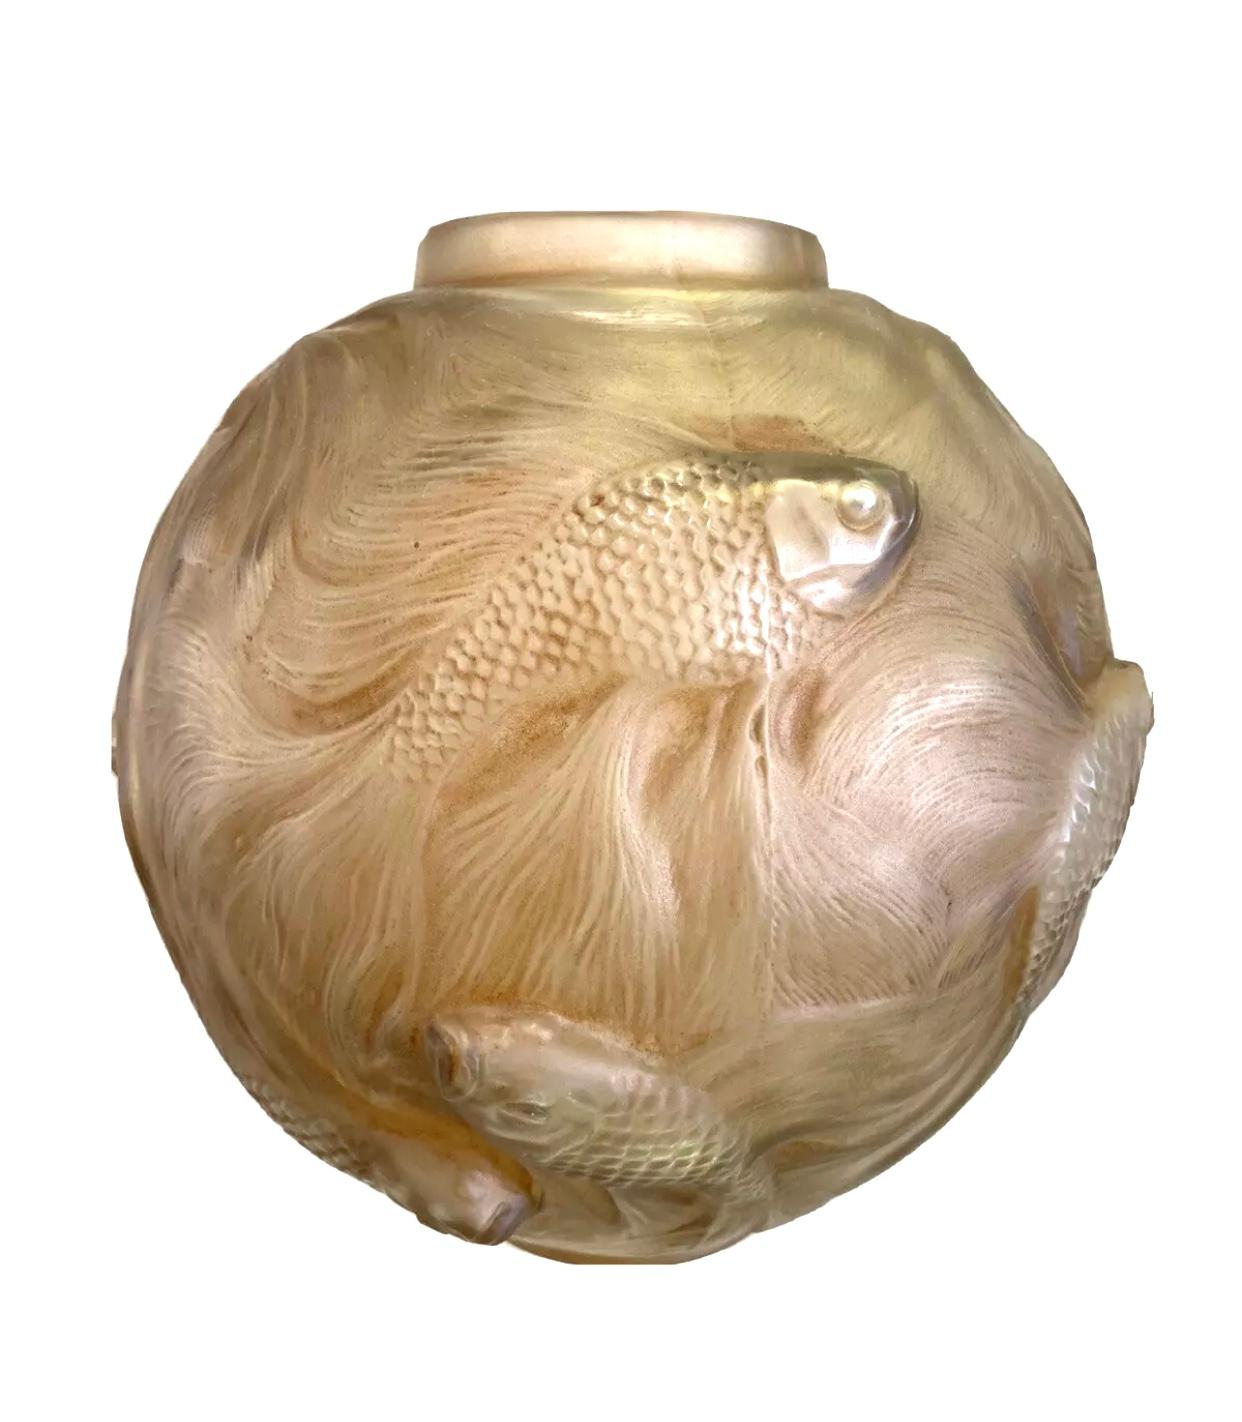 Molded 1924 René Lalique Formose Vase in Frosted Glass with Sepia Stain, Fishes